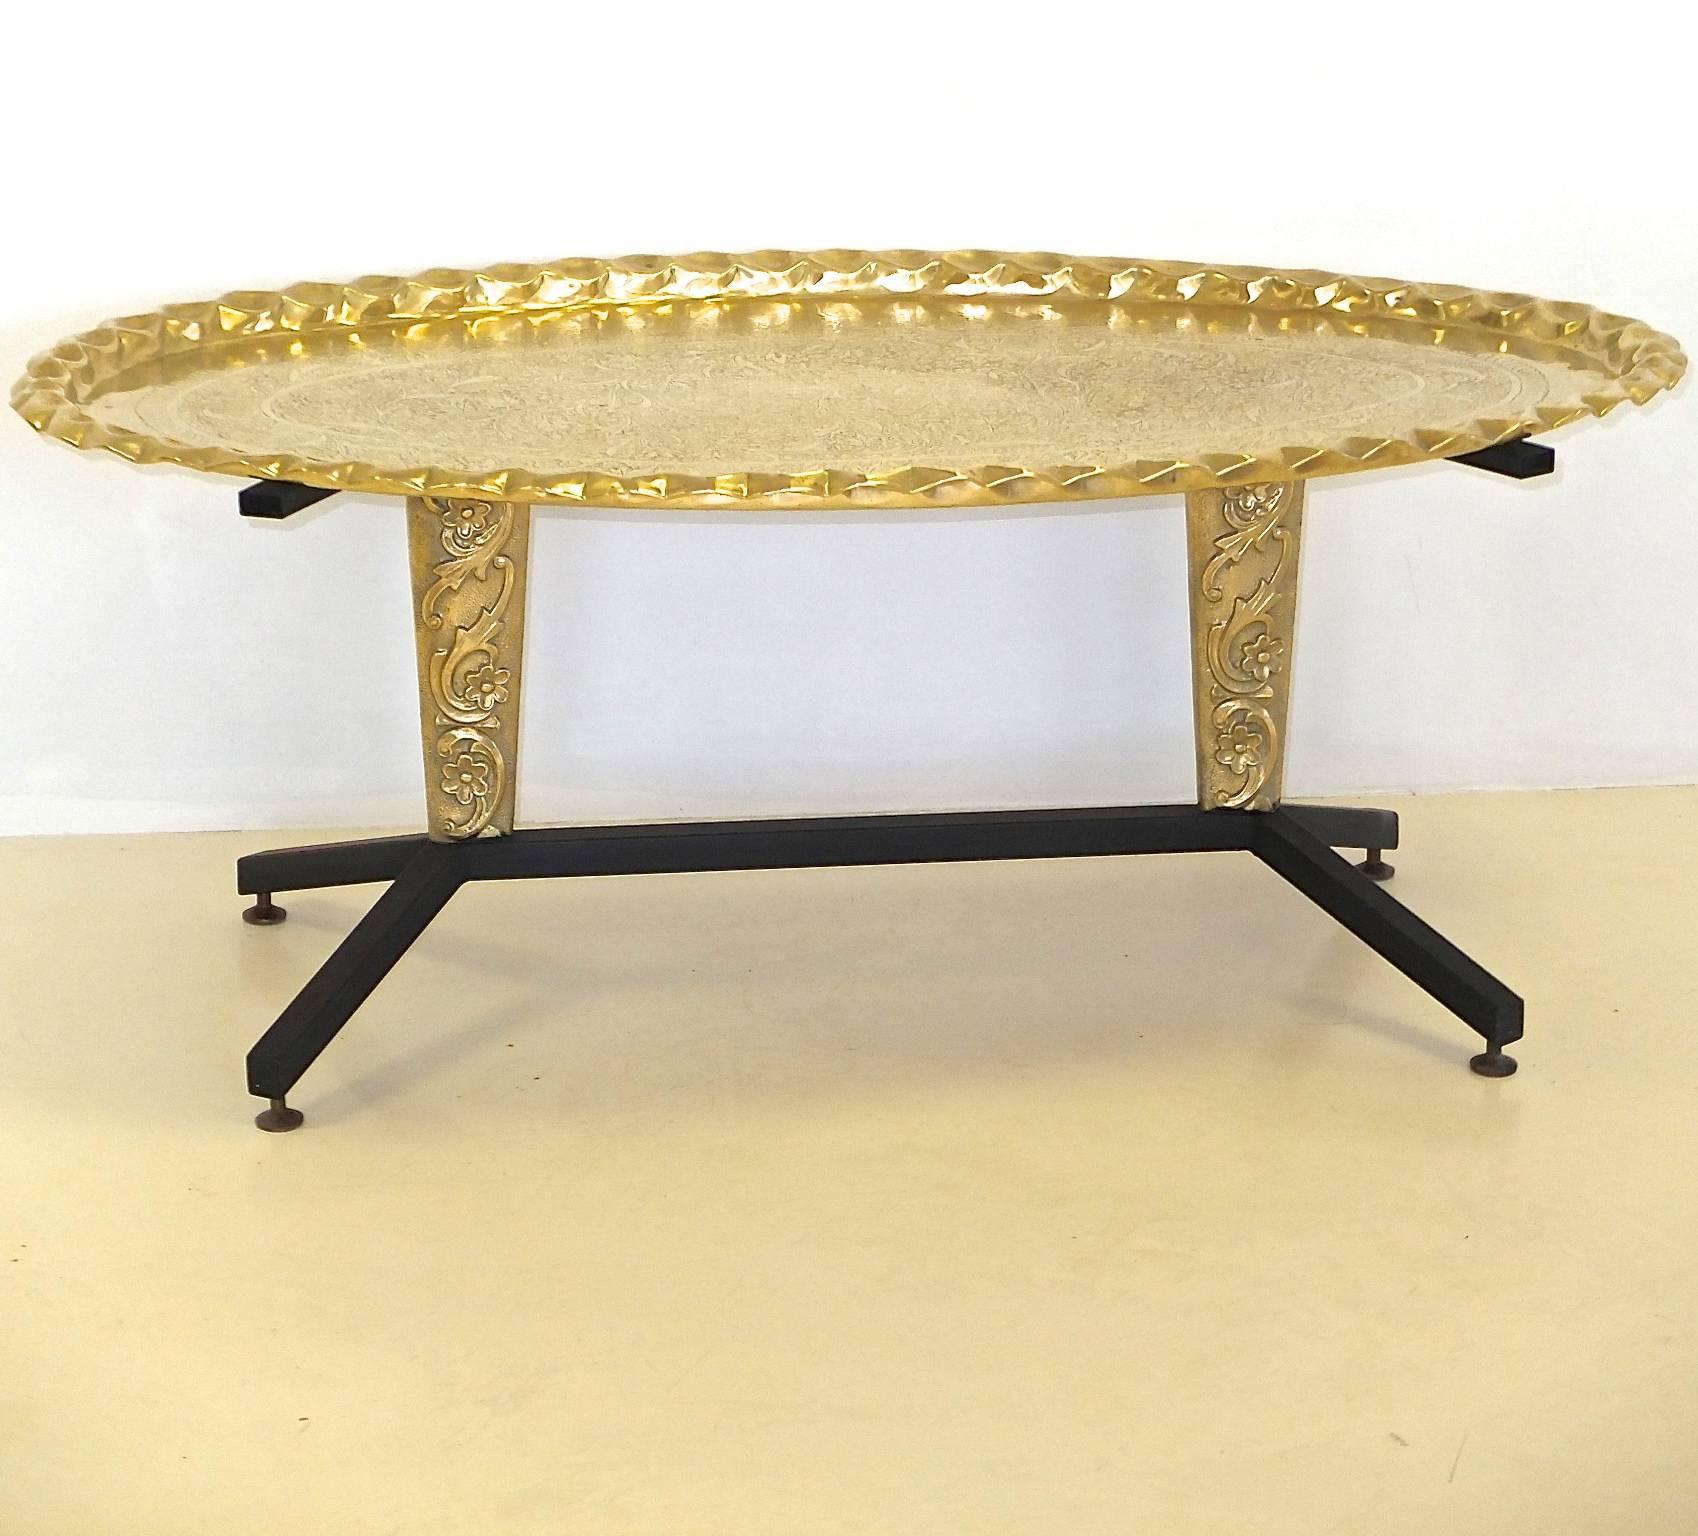 1960s Italian cocktail table with splayed black enameled steel legs and two moulded brass cartouche form pedestals above which are splayed steel supports. 

This table was most likely intended to have a glass or marble top but we have paired it